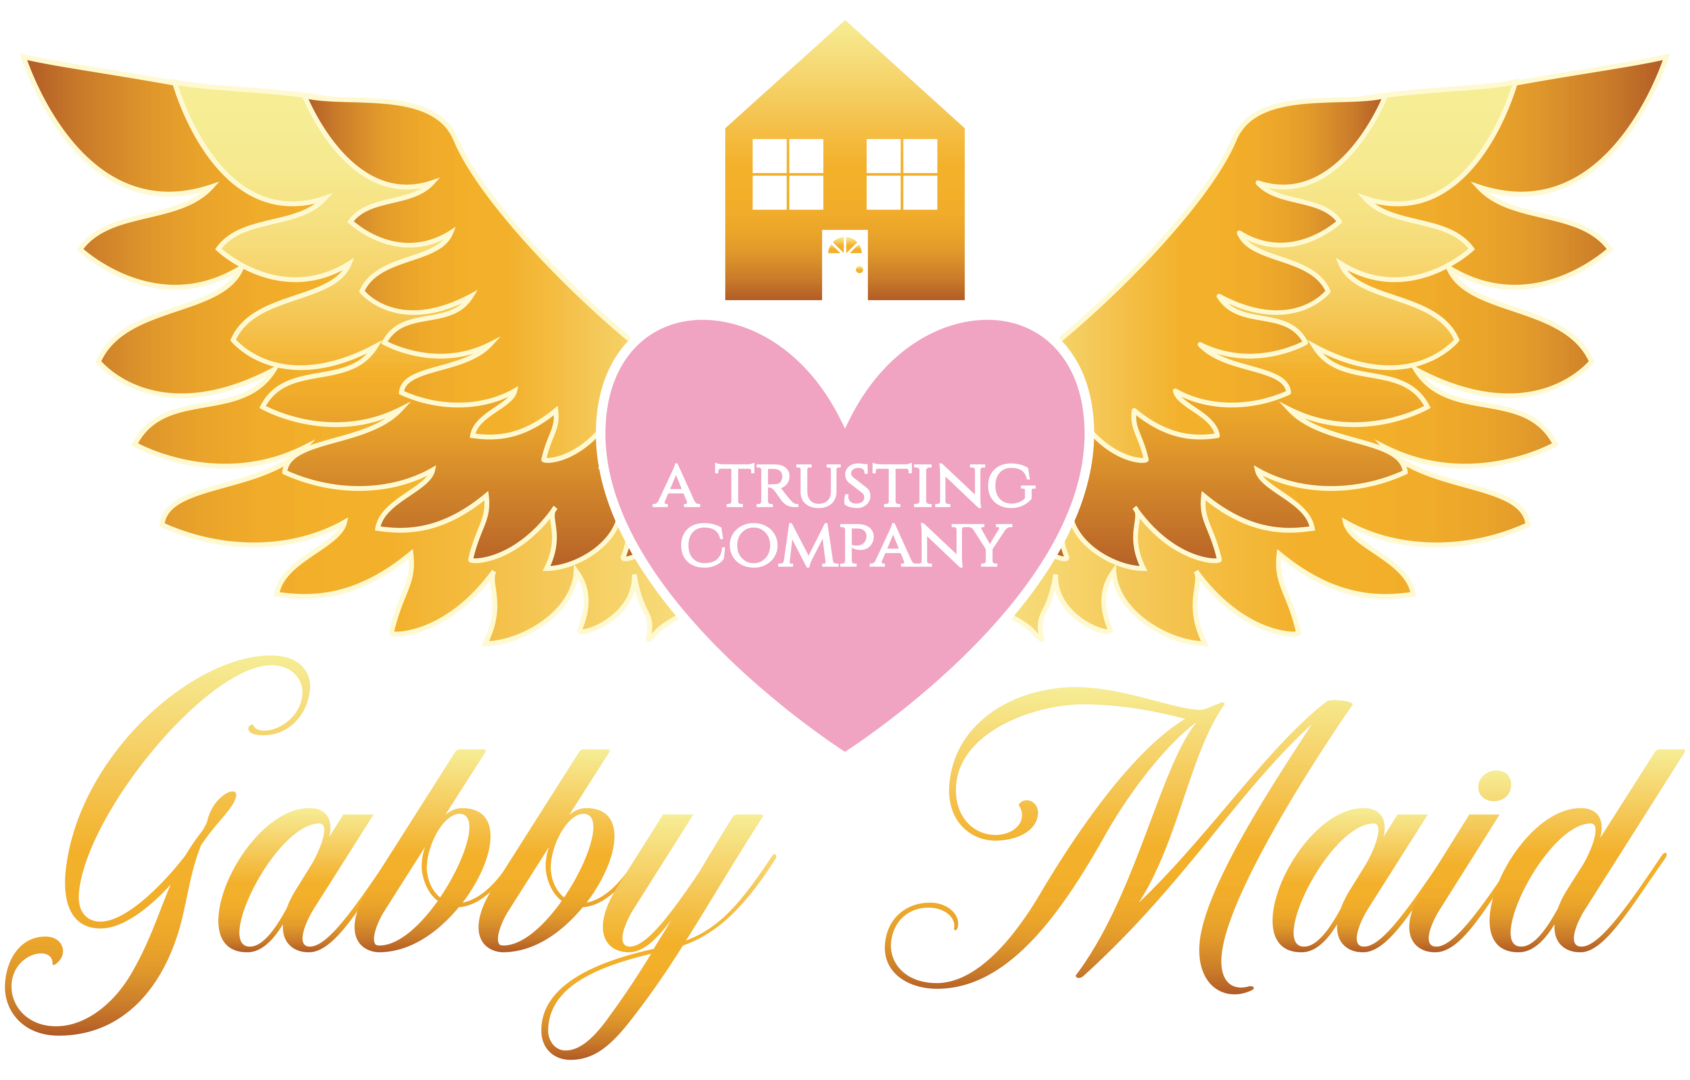 A trusting company logo with wings and a heart.